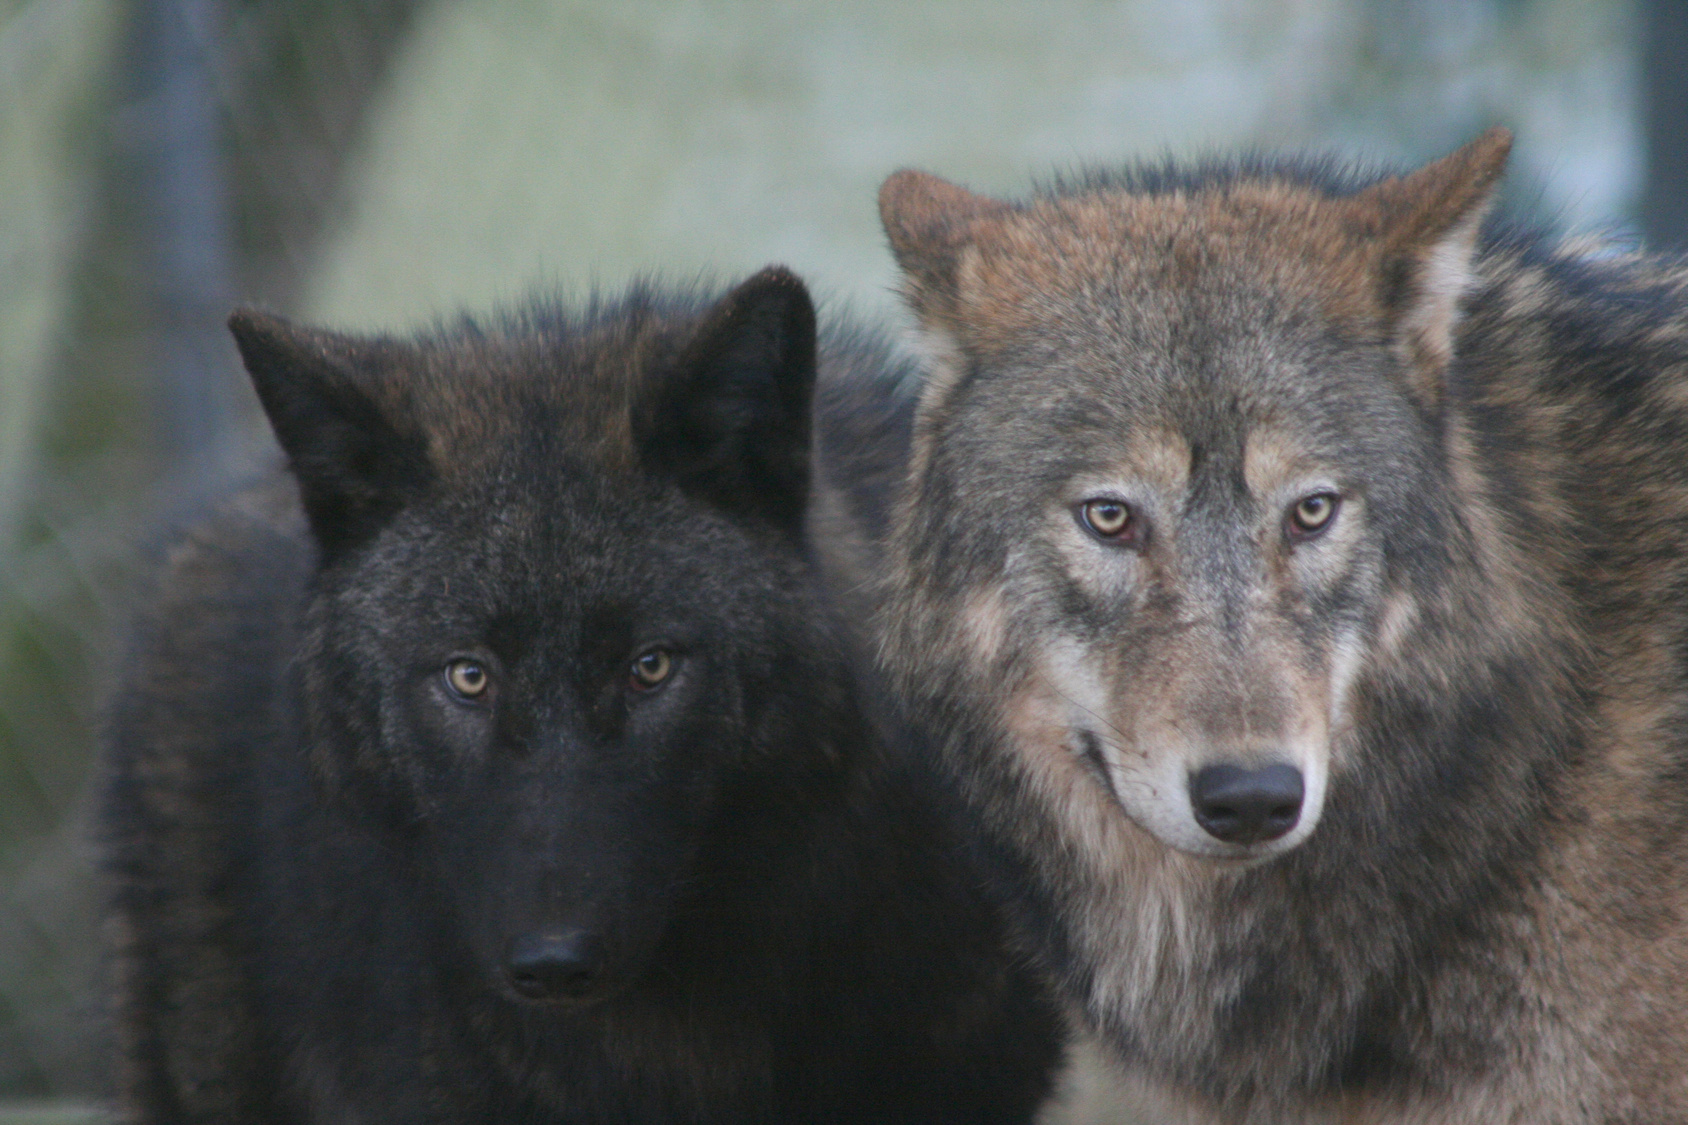 IMG:http://fc01.deviantart.net/fs70/f/2010/334/4/8/two_wolves_2684862_by_stockproject1-d33yuma.jpg